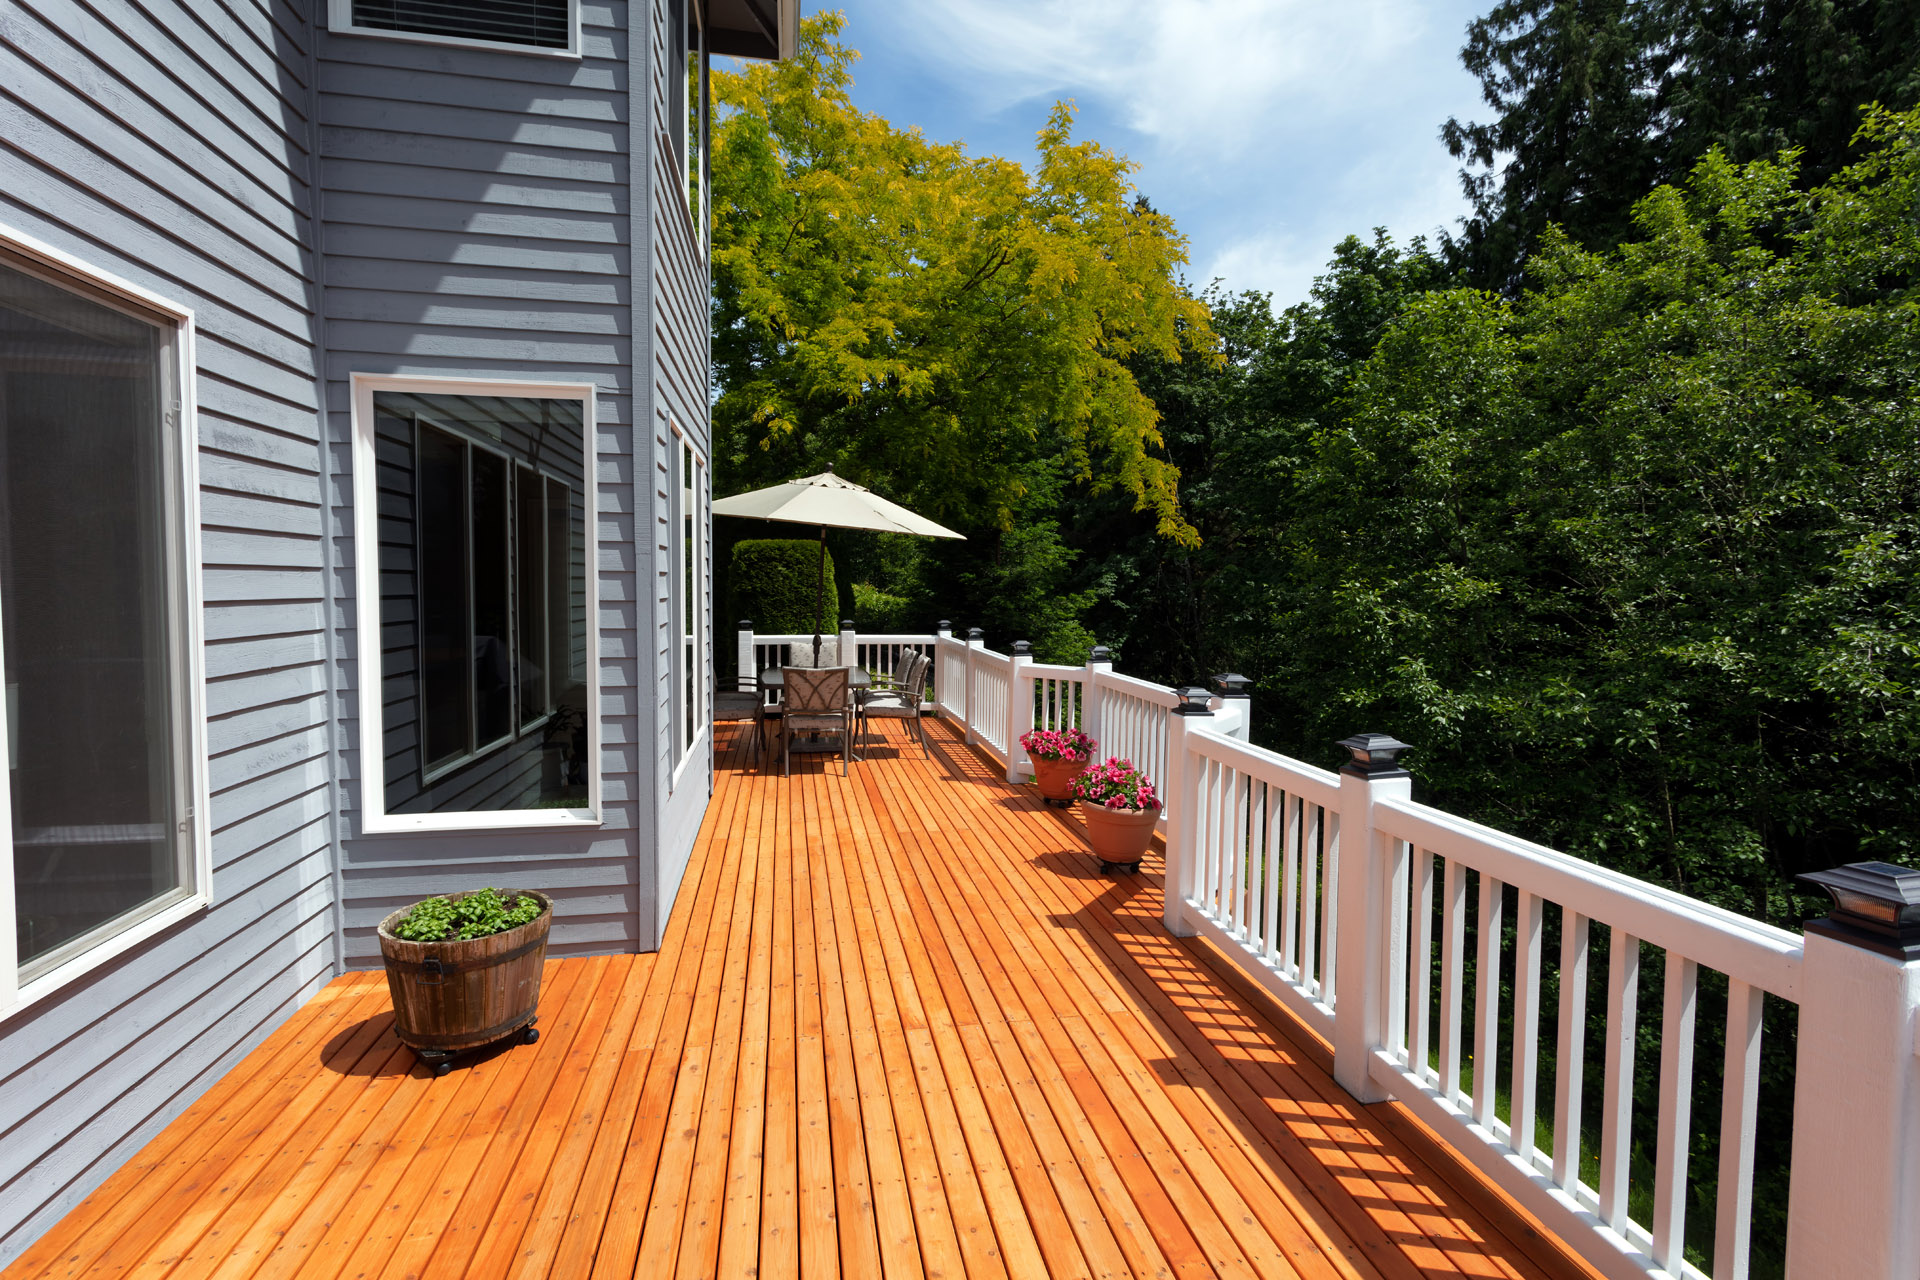 Enhance Your Outdoor Living: BA Exteriors’ Guide to Deck and Porch Renovations